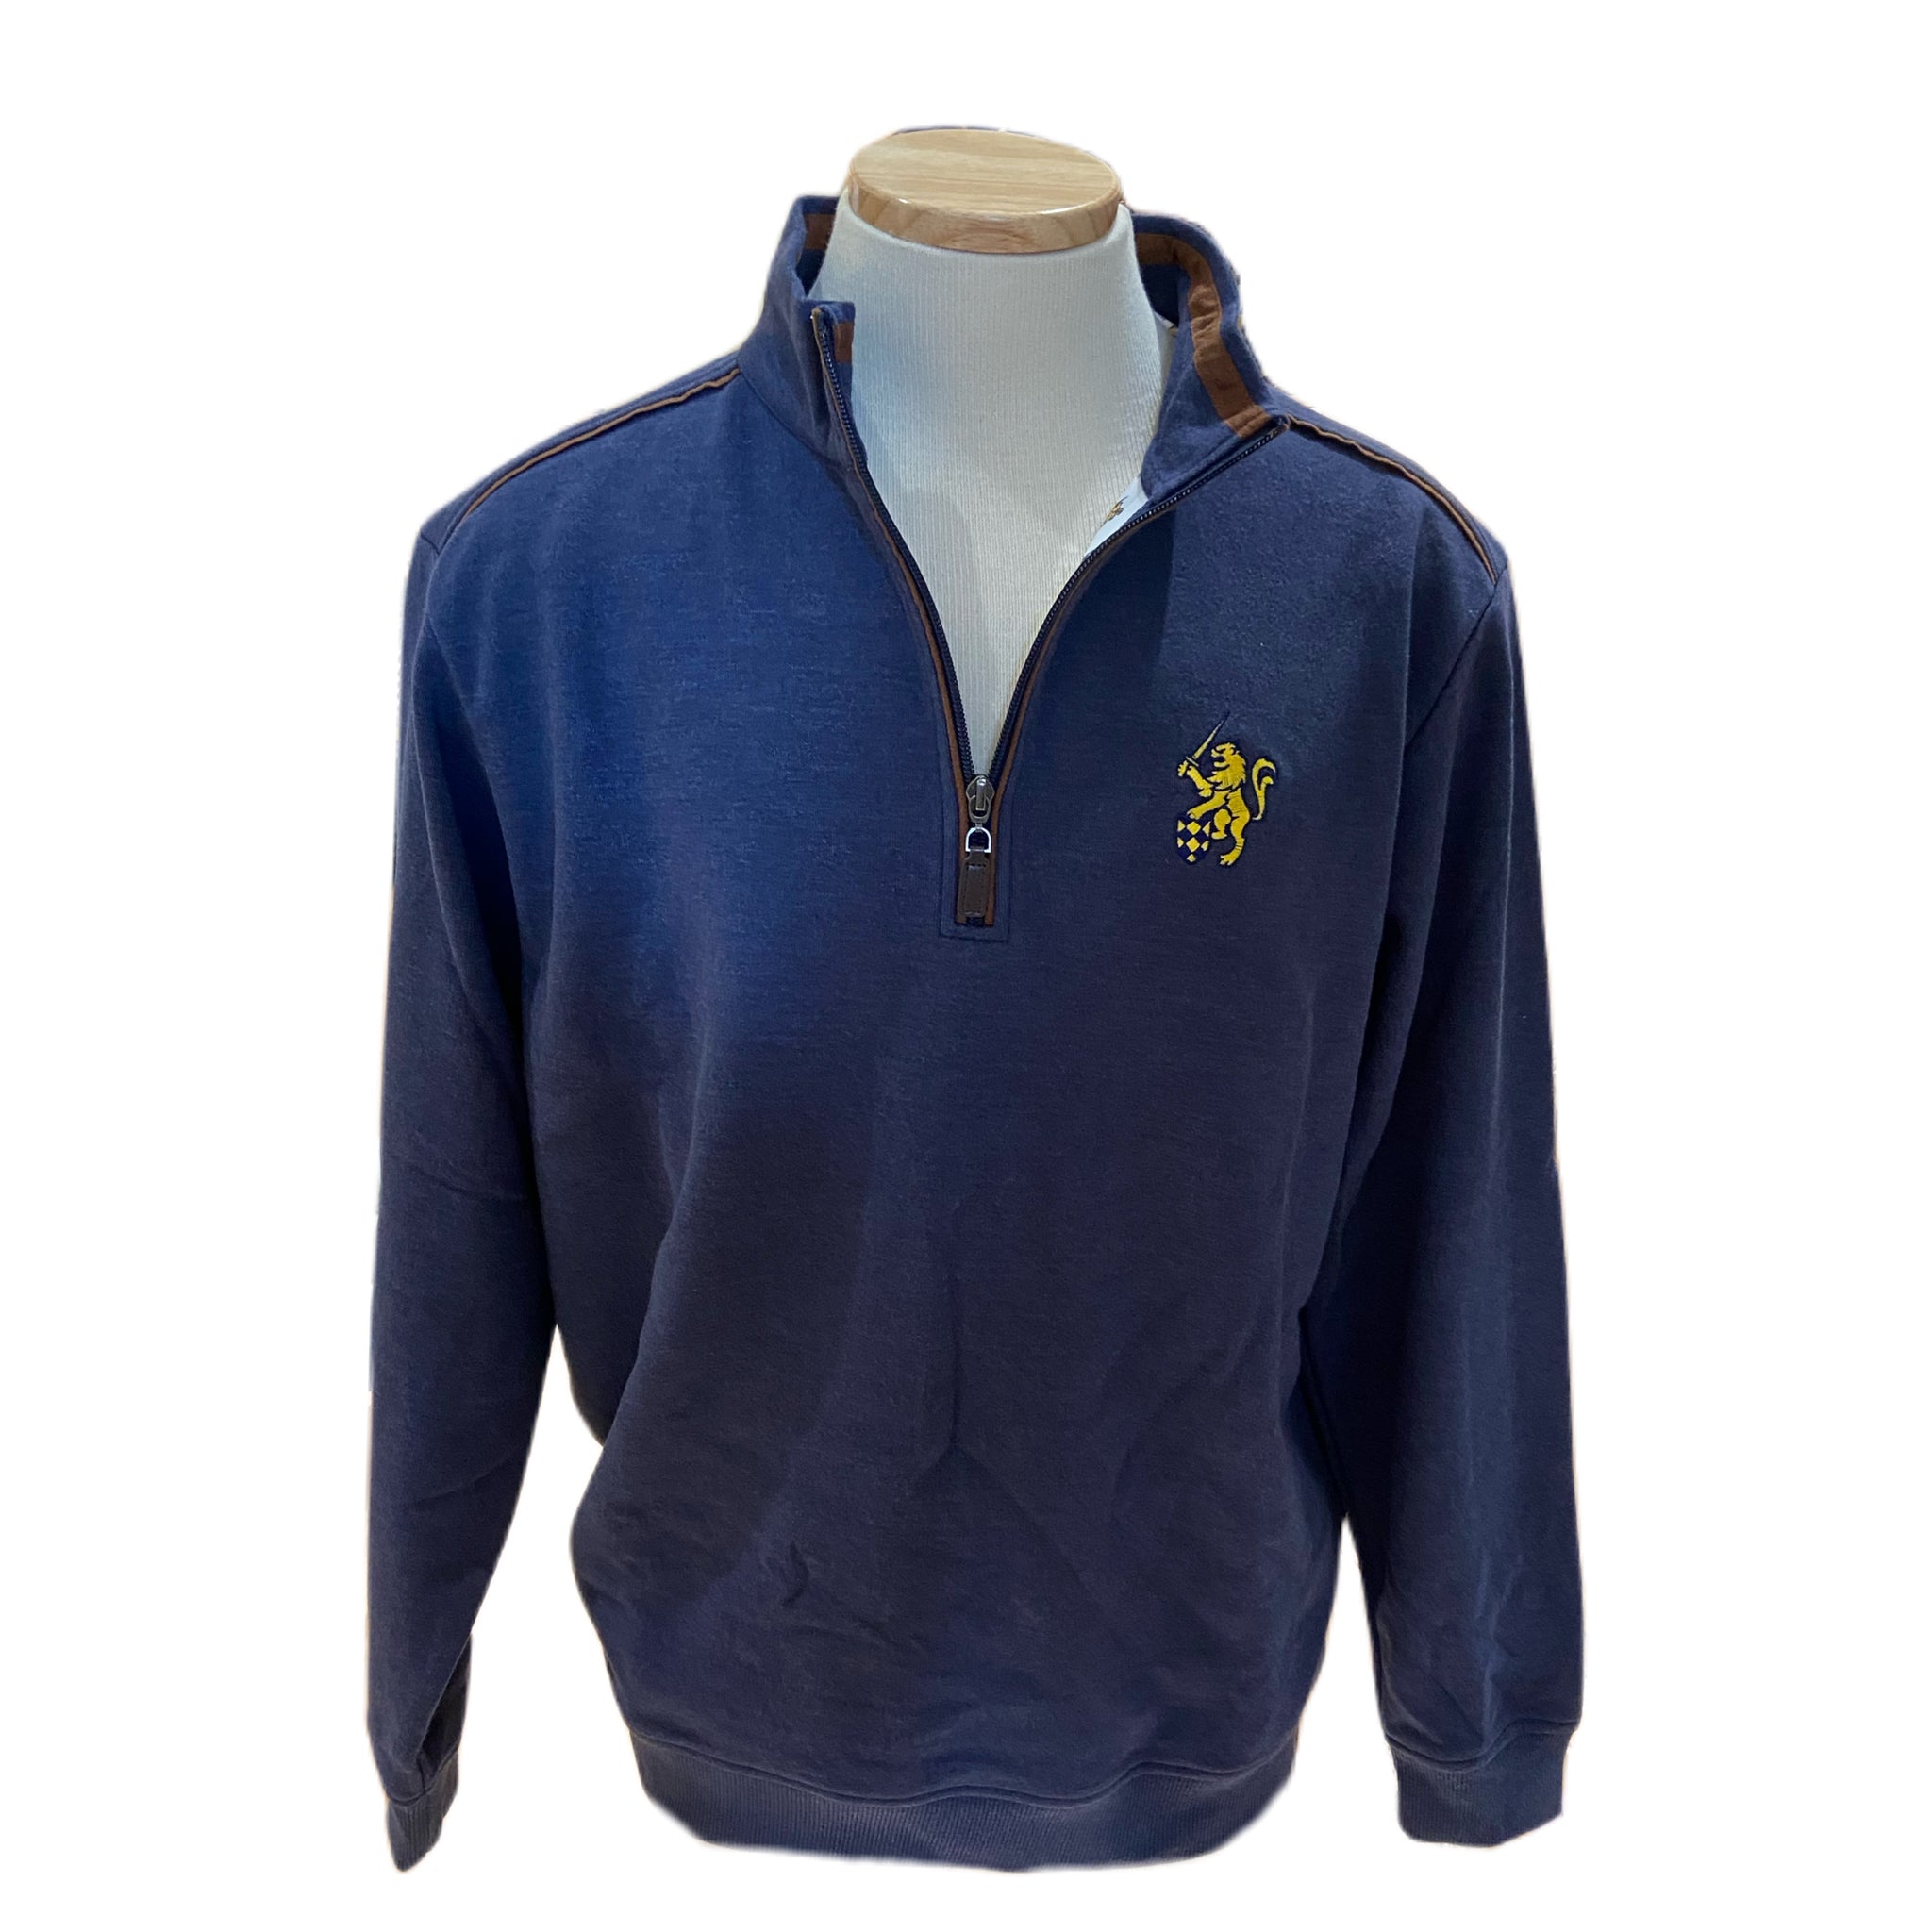 Horn Legend Navy Quarter Zip with Patches